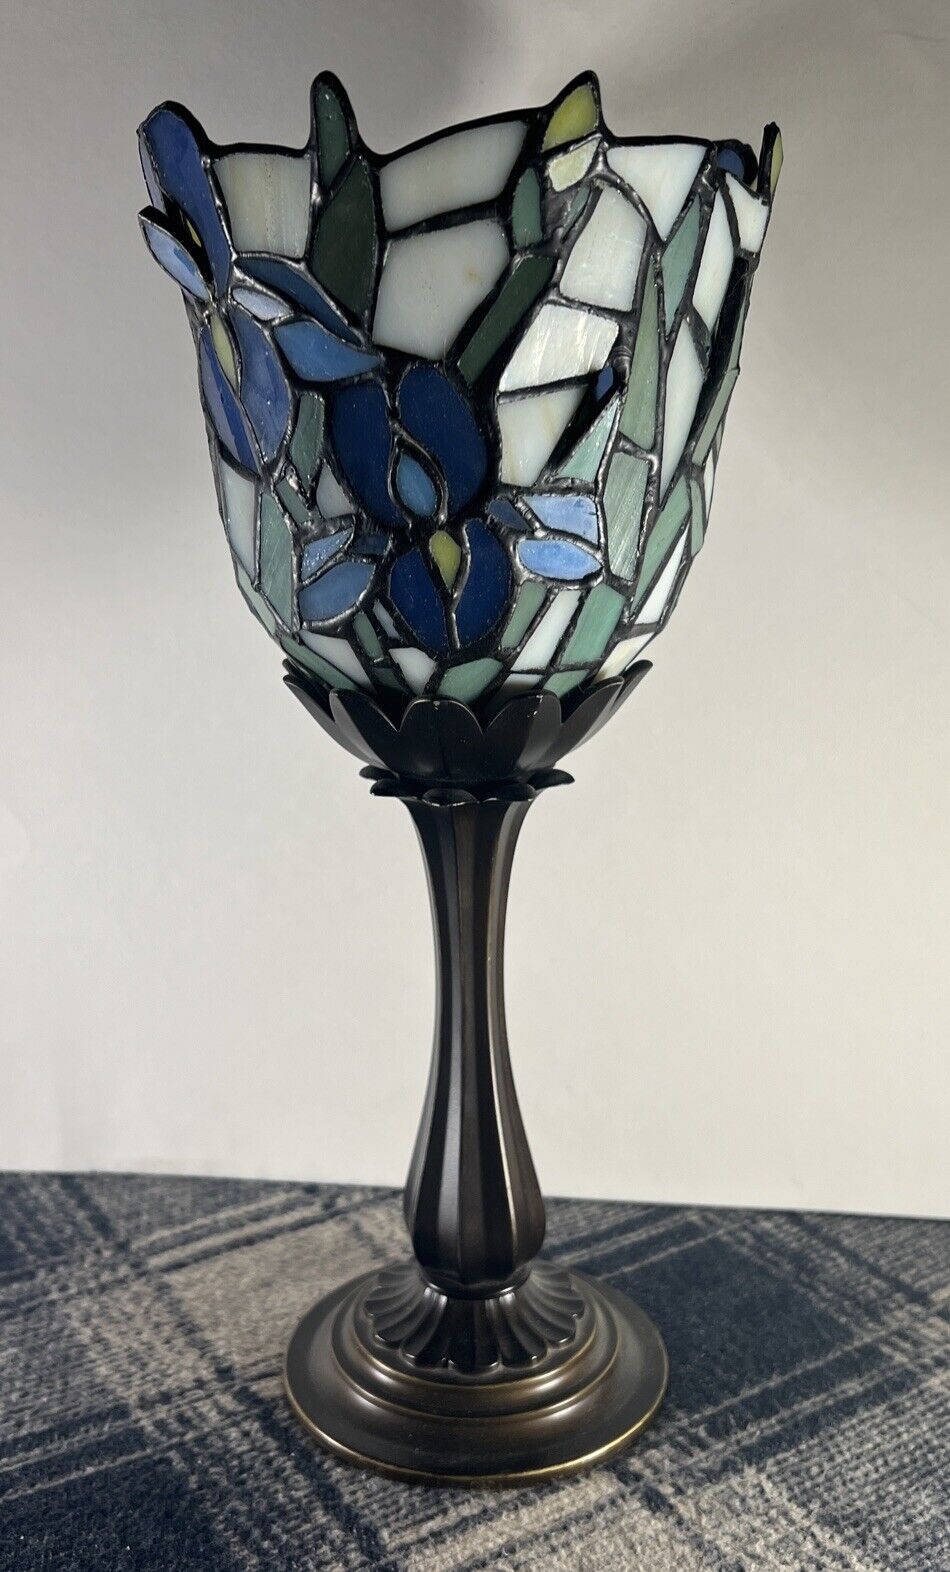 PartyLite Blue Iris Tiffany Style Stained Glass Tea Light Votive Candle Holder